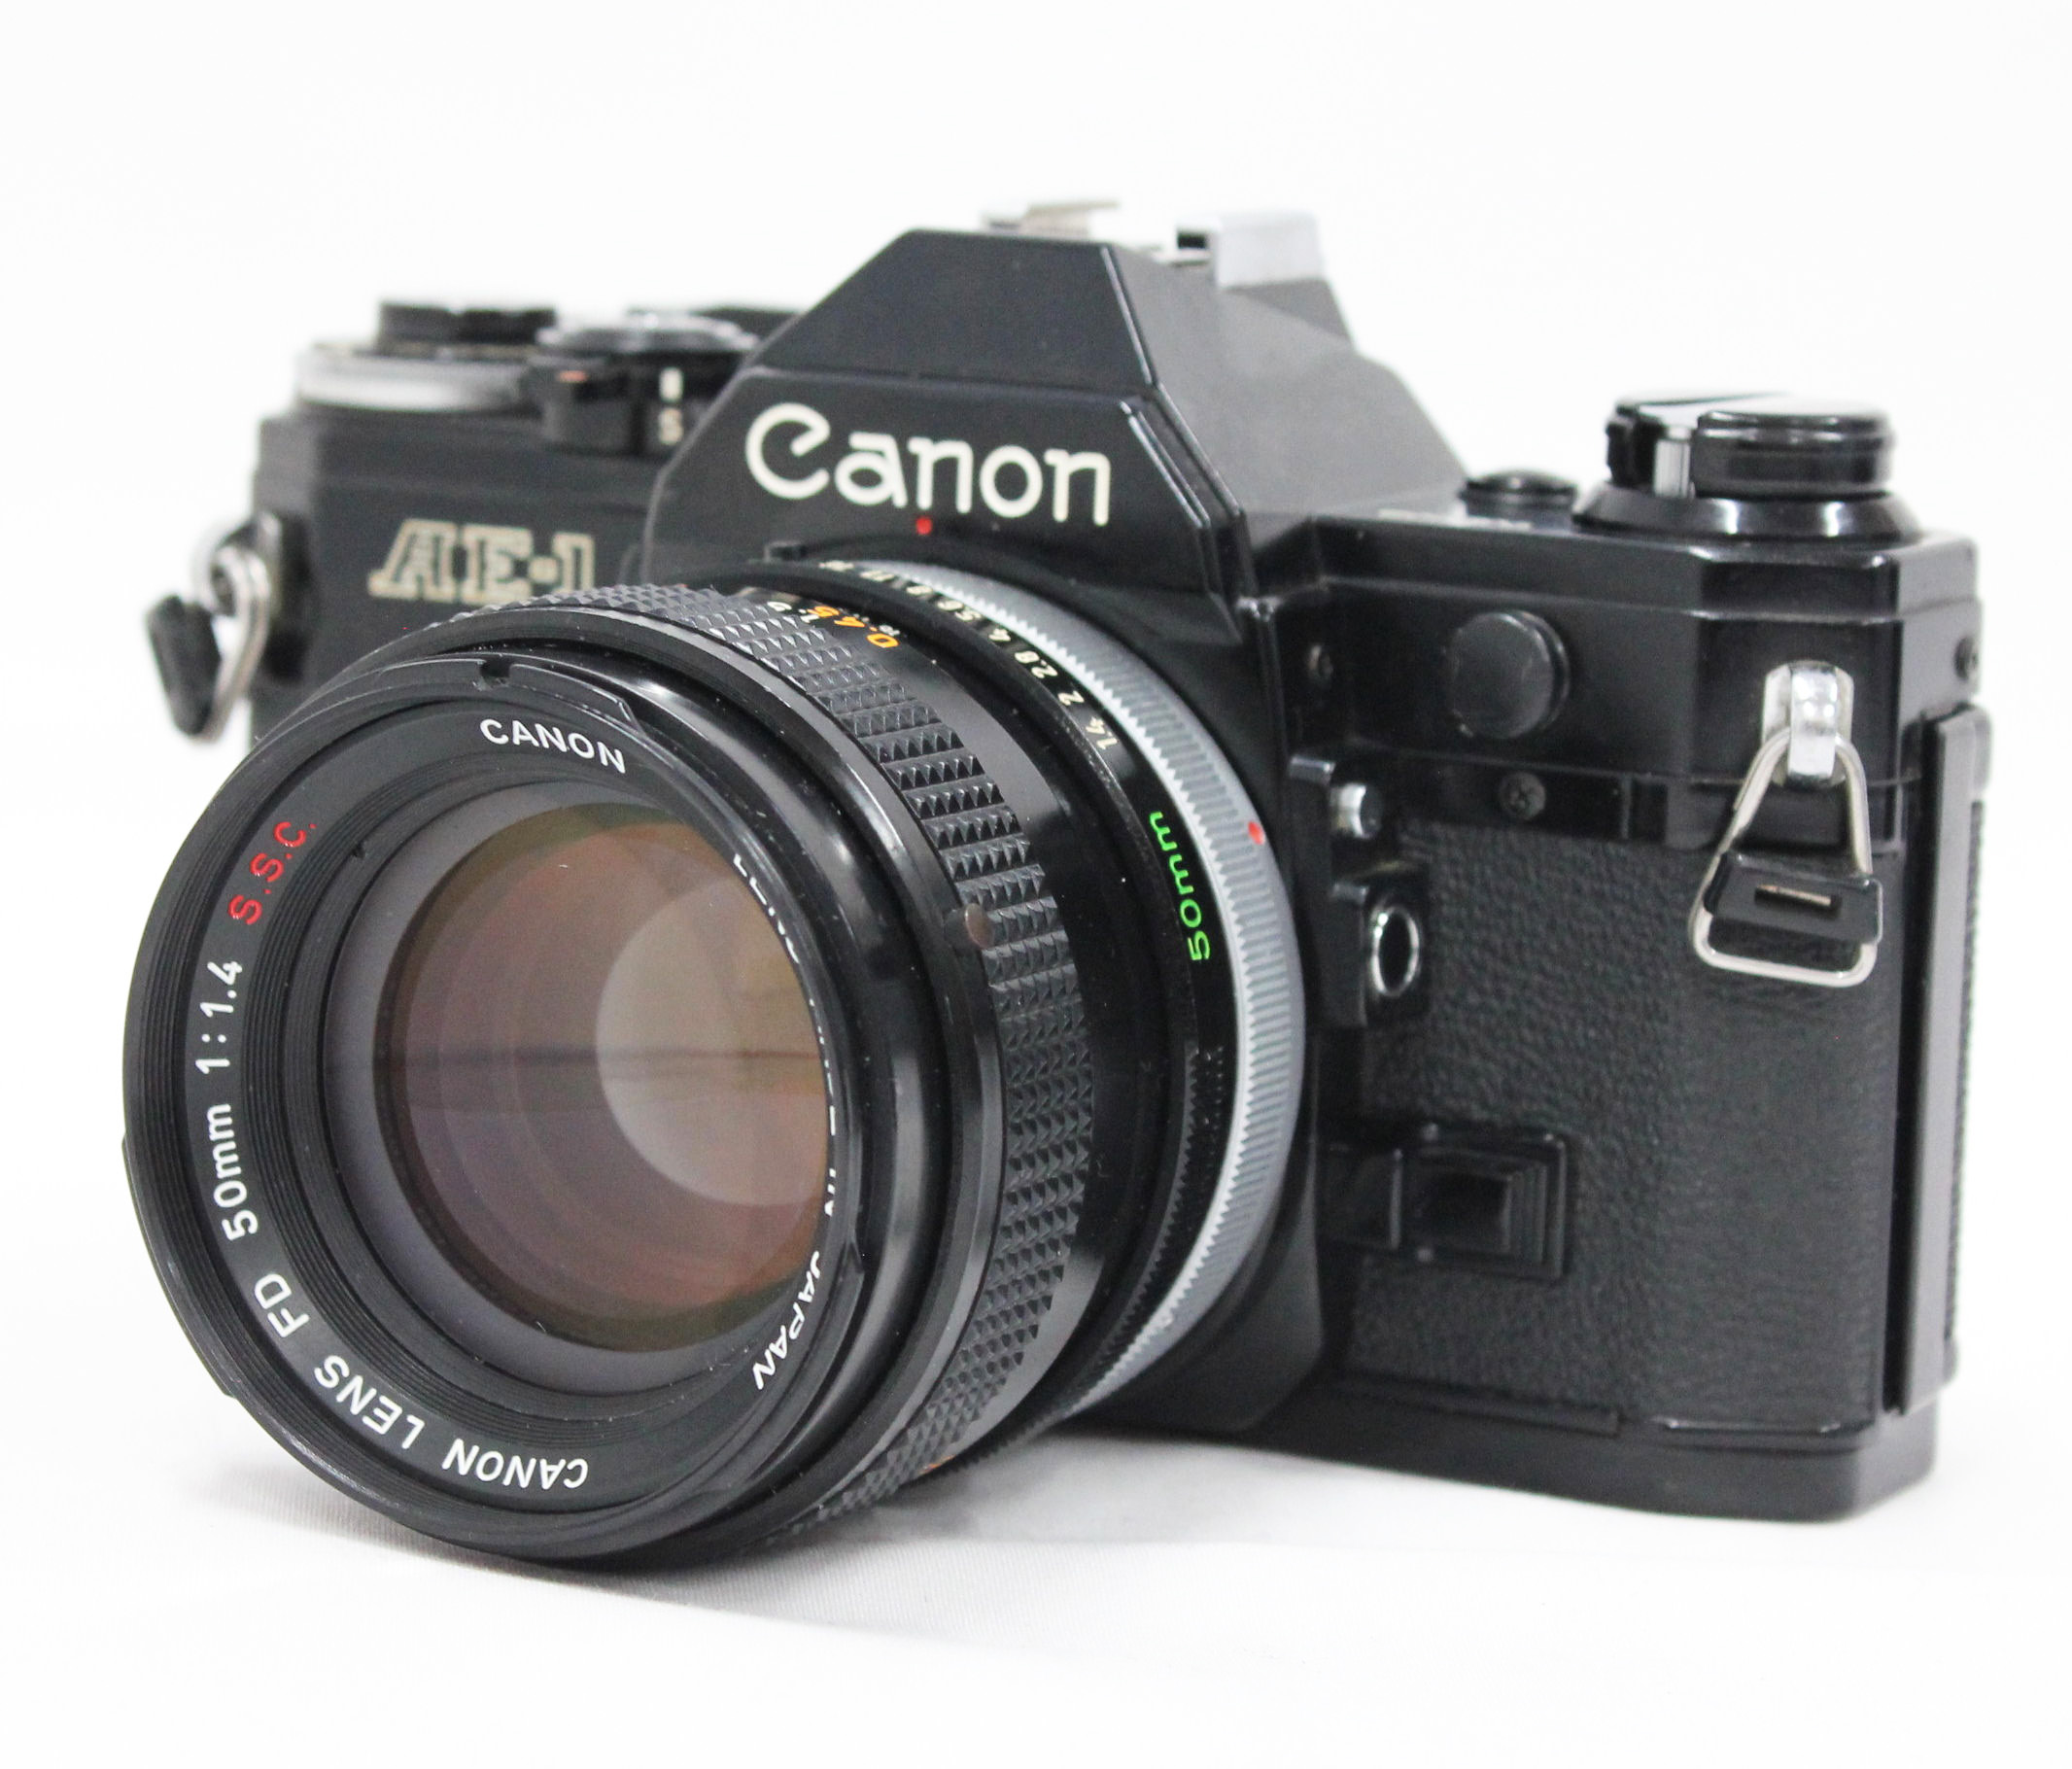 Canon AE-1 35mm SLR Film Camera Black from Japan [For Parts]